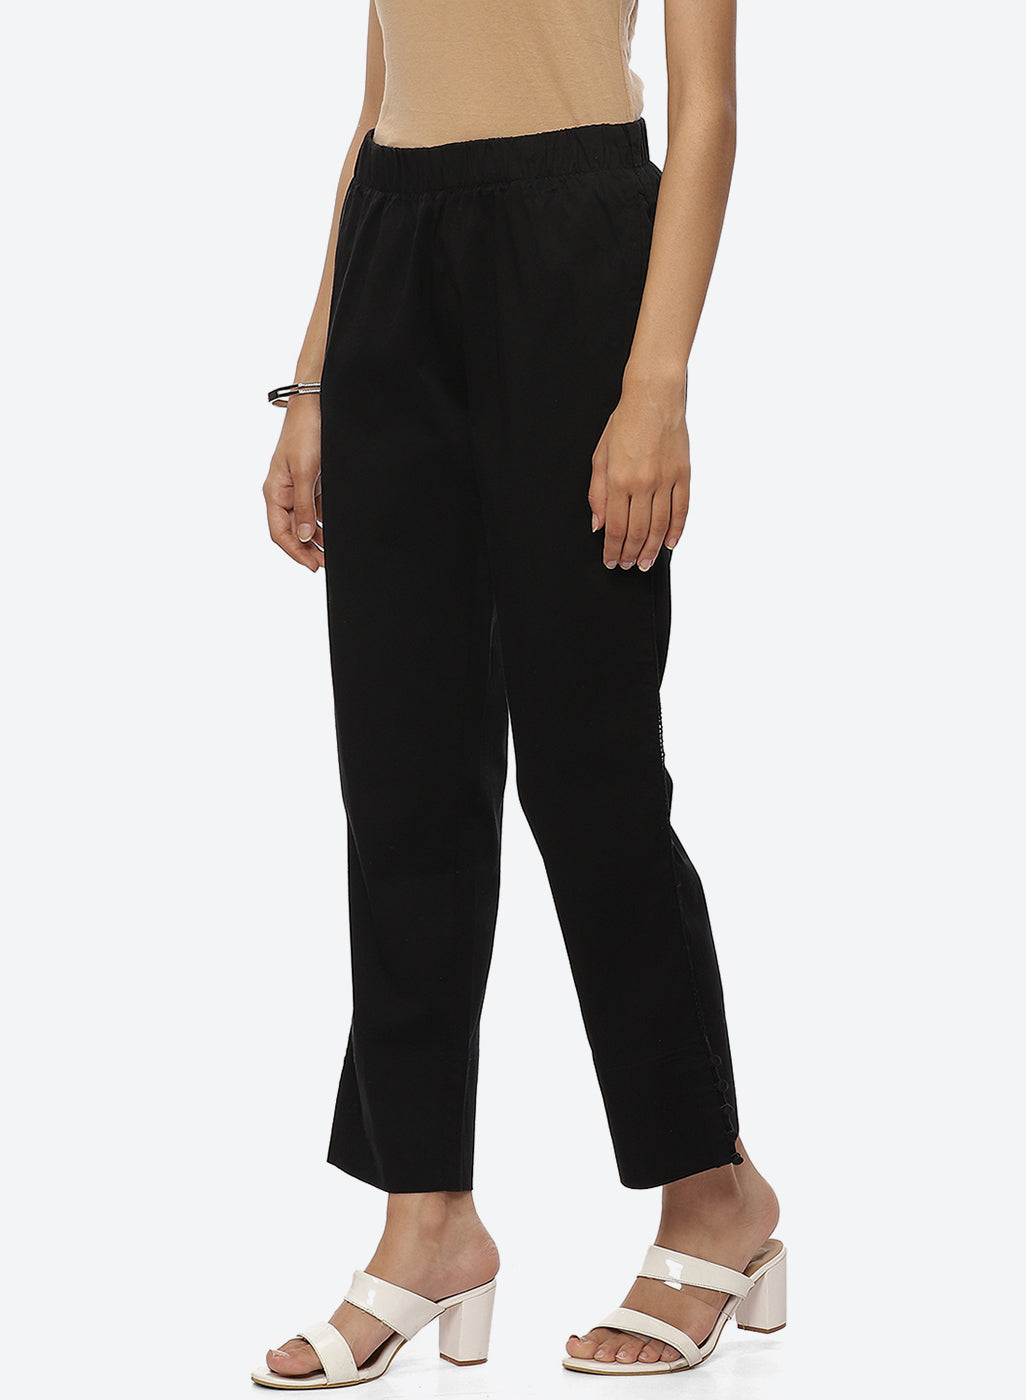 Black Trouser Pants In Solid Color